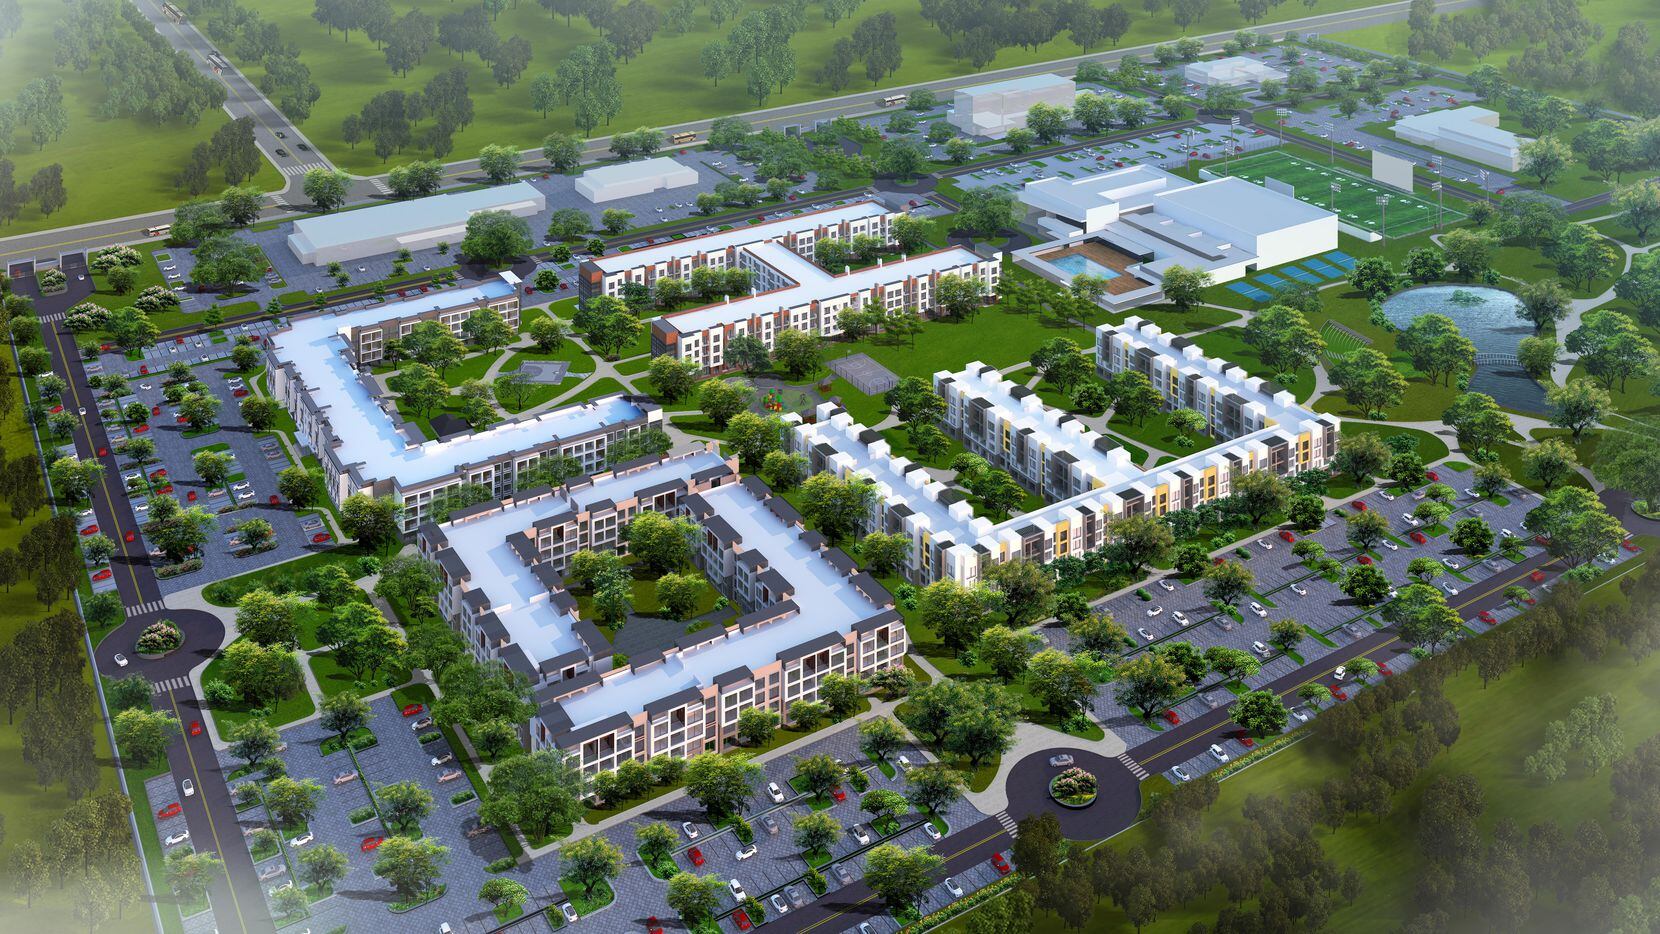 An artist's rendering shows an aerial view of a Homz community, which the company plans to...